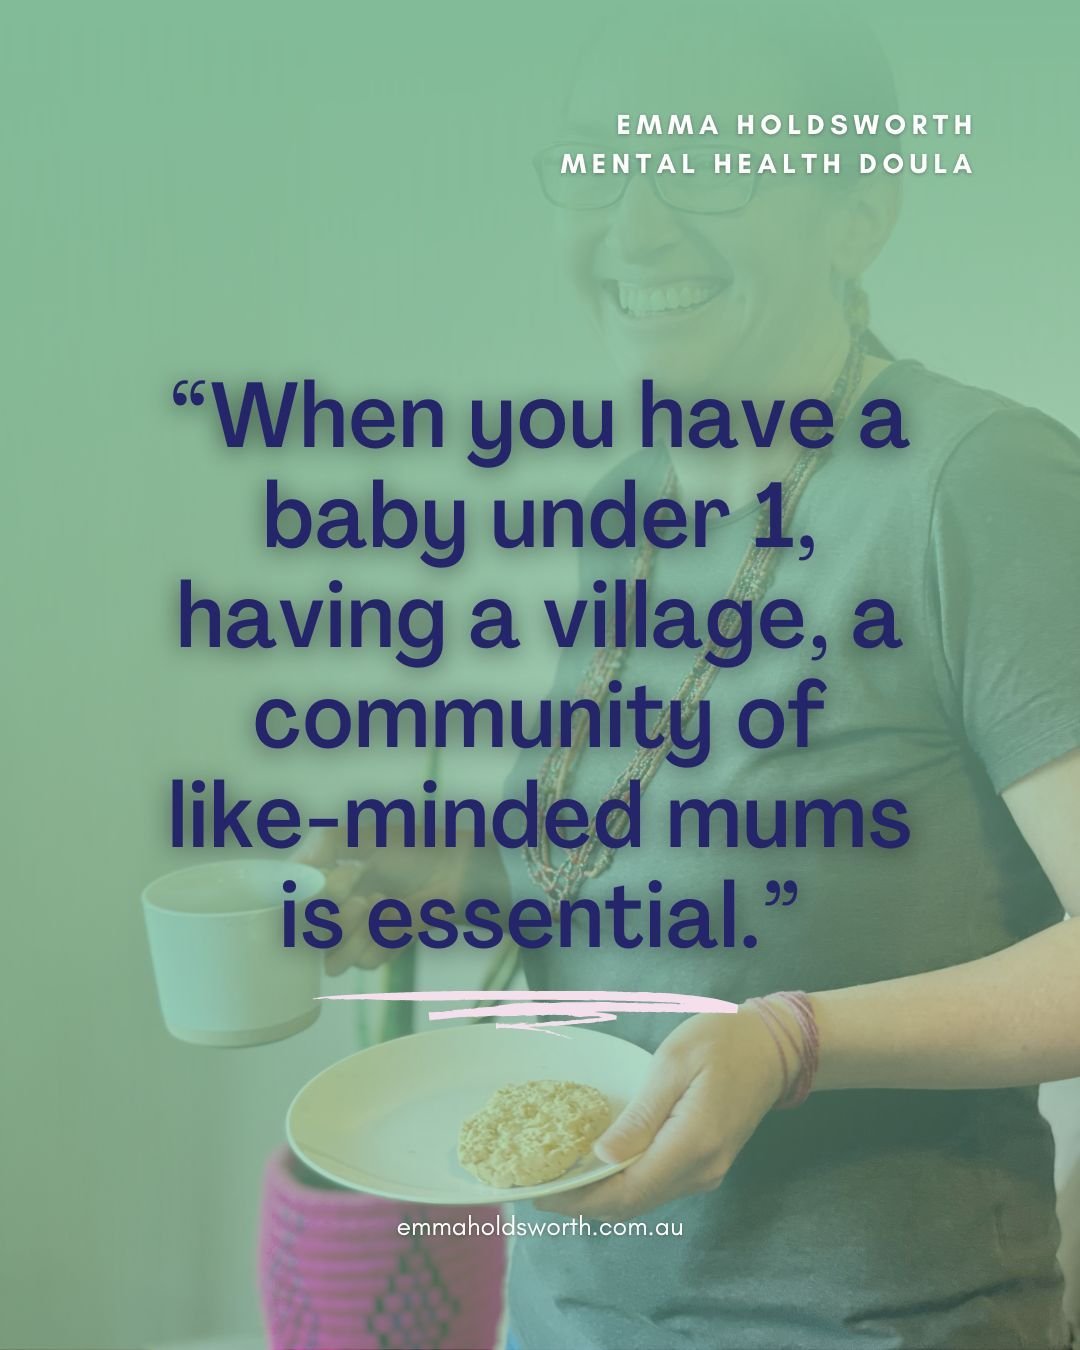 When you have a baby under 1, having a village, a community of like-minded mums is essential.

The Under 1 Mums Circle gives mums with new babies the opportunity to;

💚 Grow their confidence as a mother.
💚 Connect deeply with other mums and form re